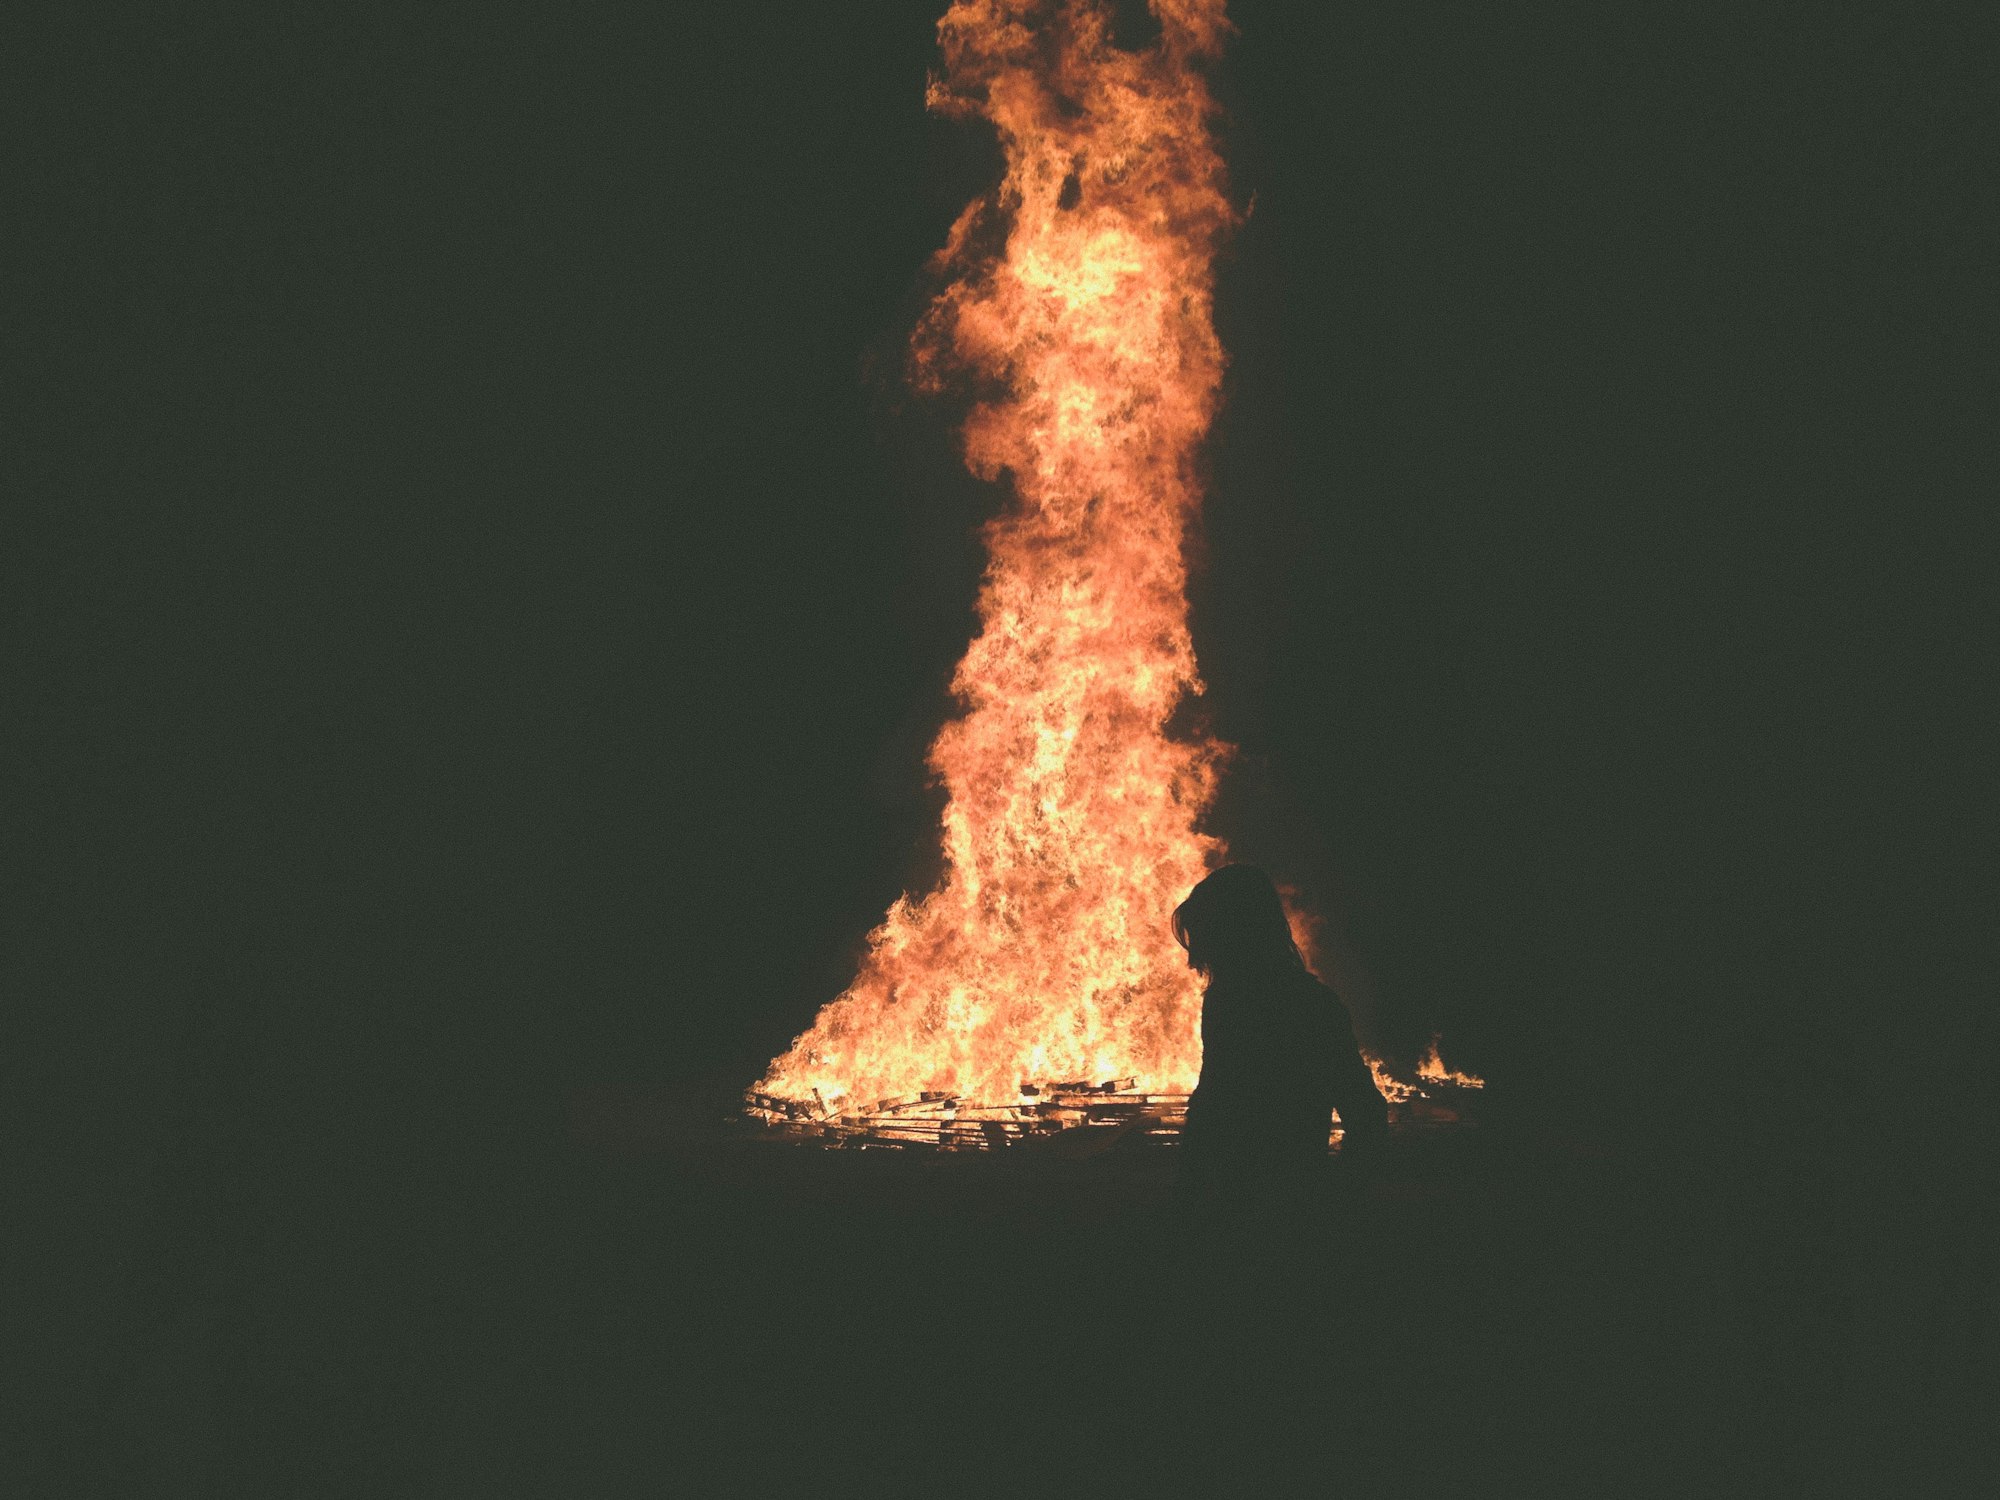 a woman's silhouette in front of a massive bonfire